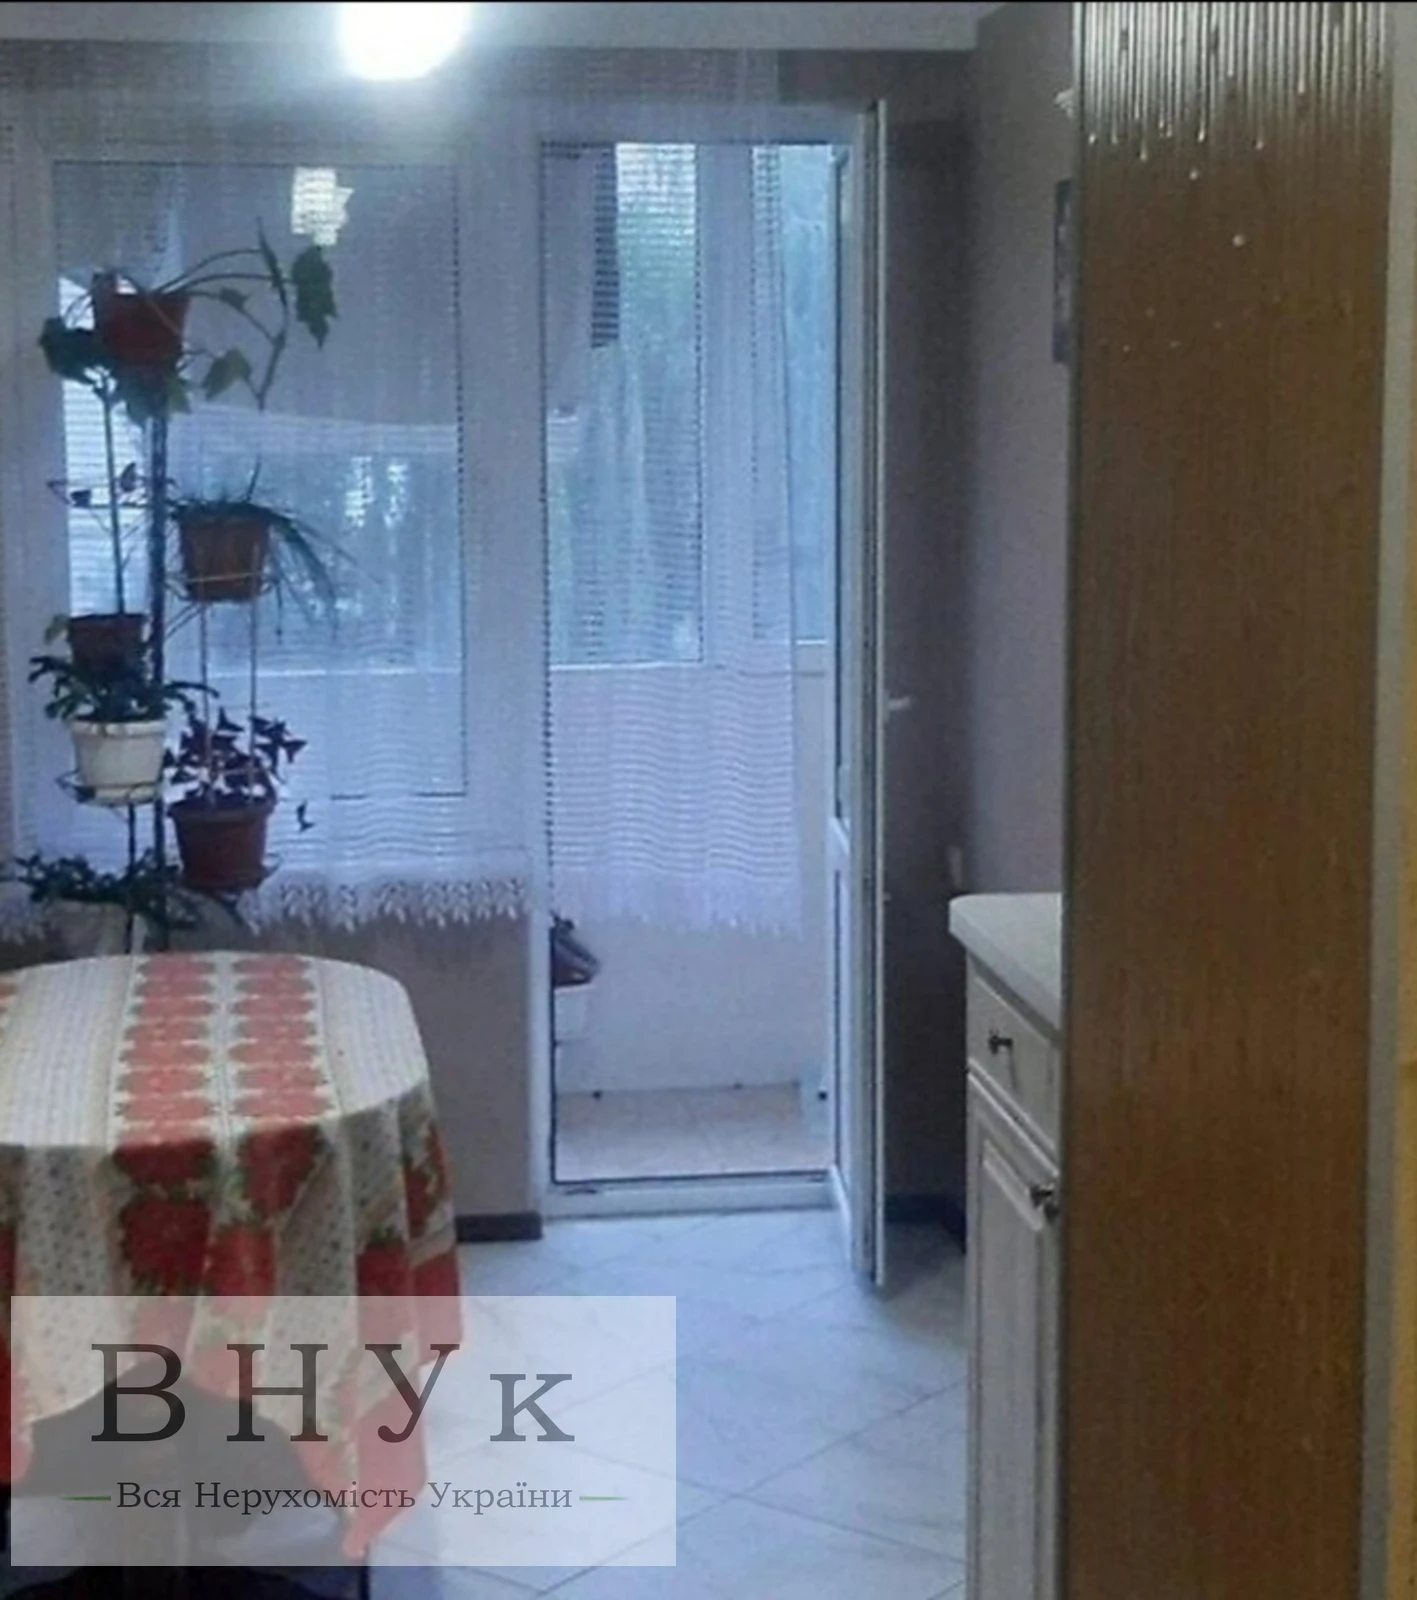 Apartments for sale. 2 rooms, 55 m², 2nd floor/5 floors. Blazhkevych Ivanny , Ternopil. 